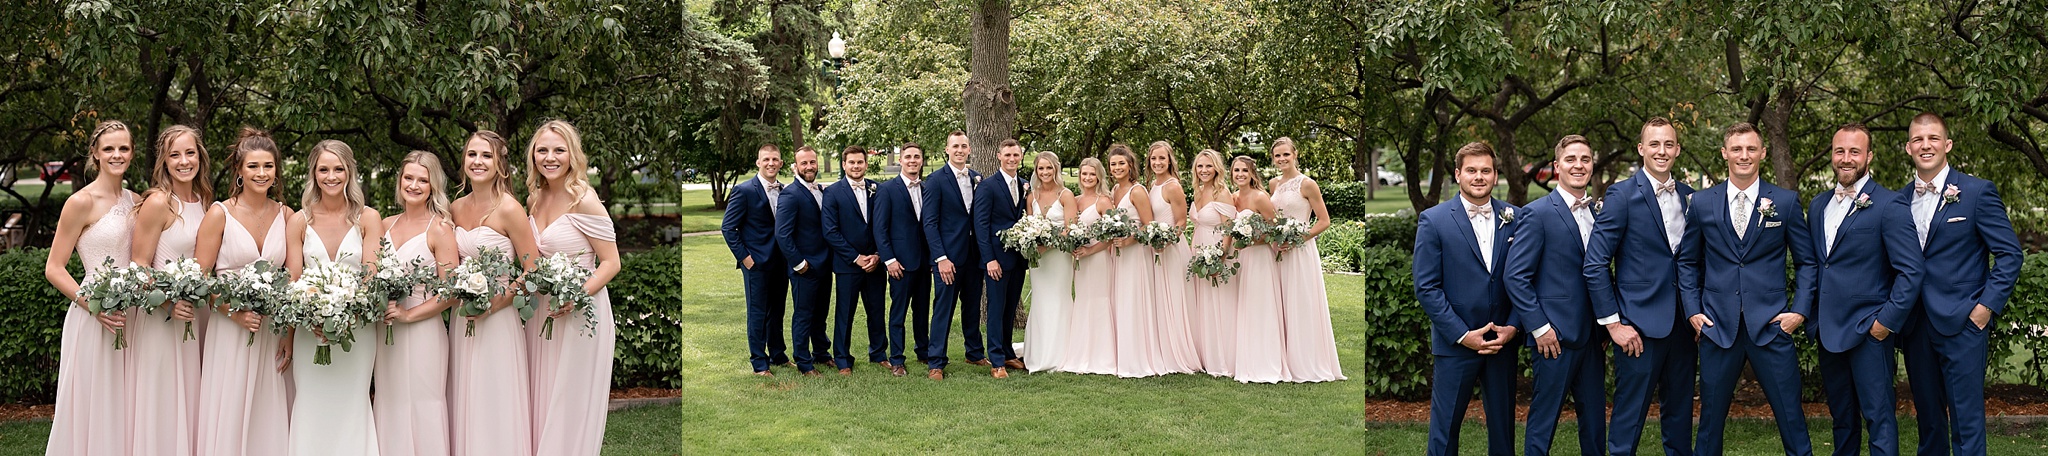 wedding party at garden wedding in south dakota blue suits with blush bridesmaids dresses